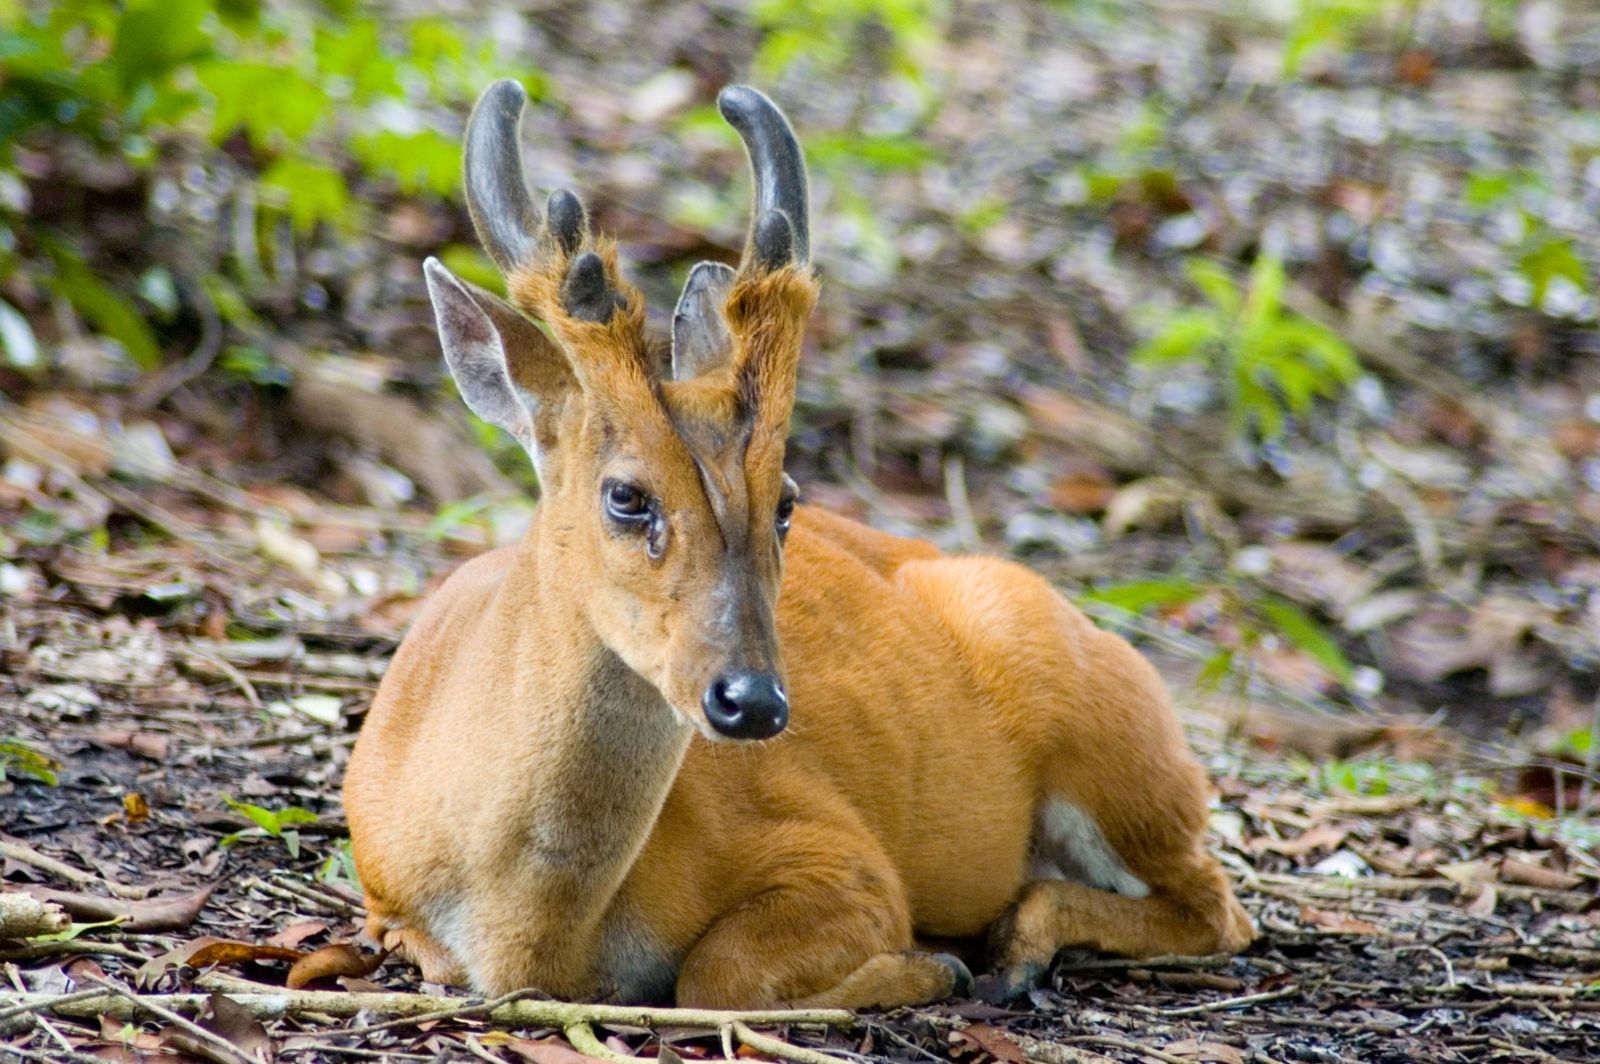 The Southern Red Muntjac. Found in south Asia, it has soft, short, brownish or greyish hair and is omnivorous, feeding on grass, fruits, shoots, seeds, birds' eggs as well as small animals. It sometimes even displays scavenging behavior, feeding on carrion. It gives calls similar to barking, usually upon sensing a predator.  Males are extremely territorial anddespite their diminutive sizecan be quite fierce. They will fight each other for territory using their antlers or their tusk-like upper canine teeth, and can even defend themselves against certain predators such as dogs.